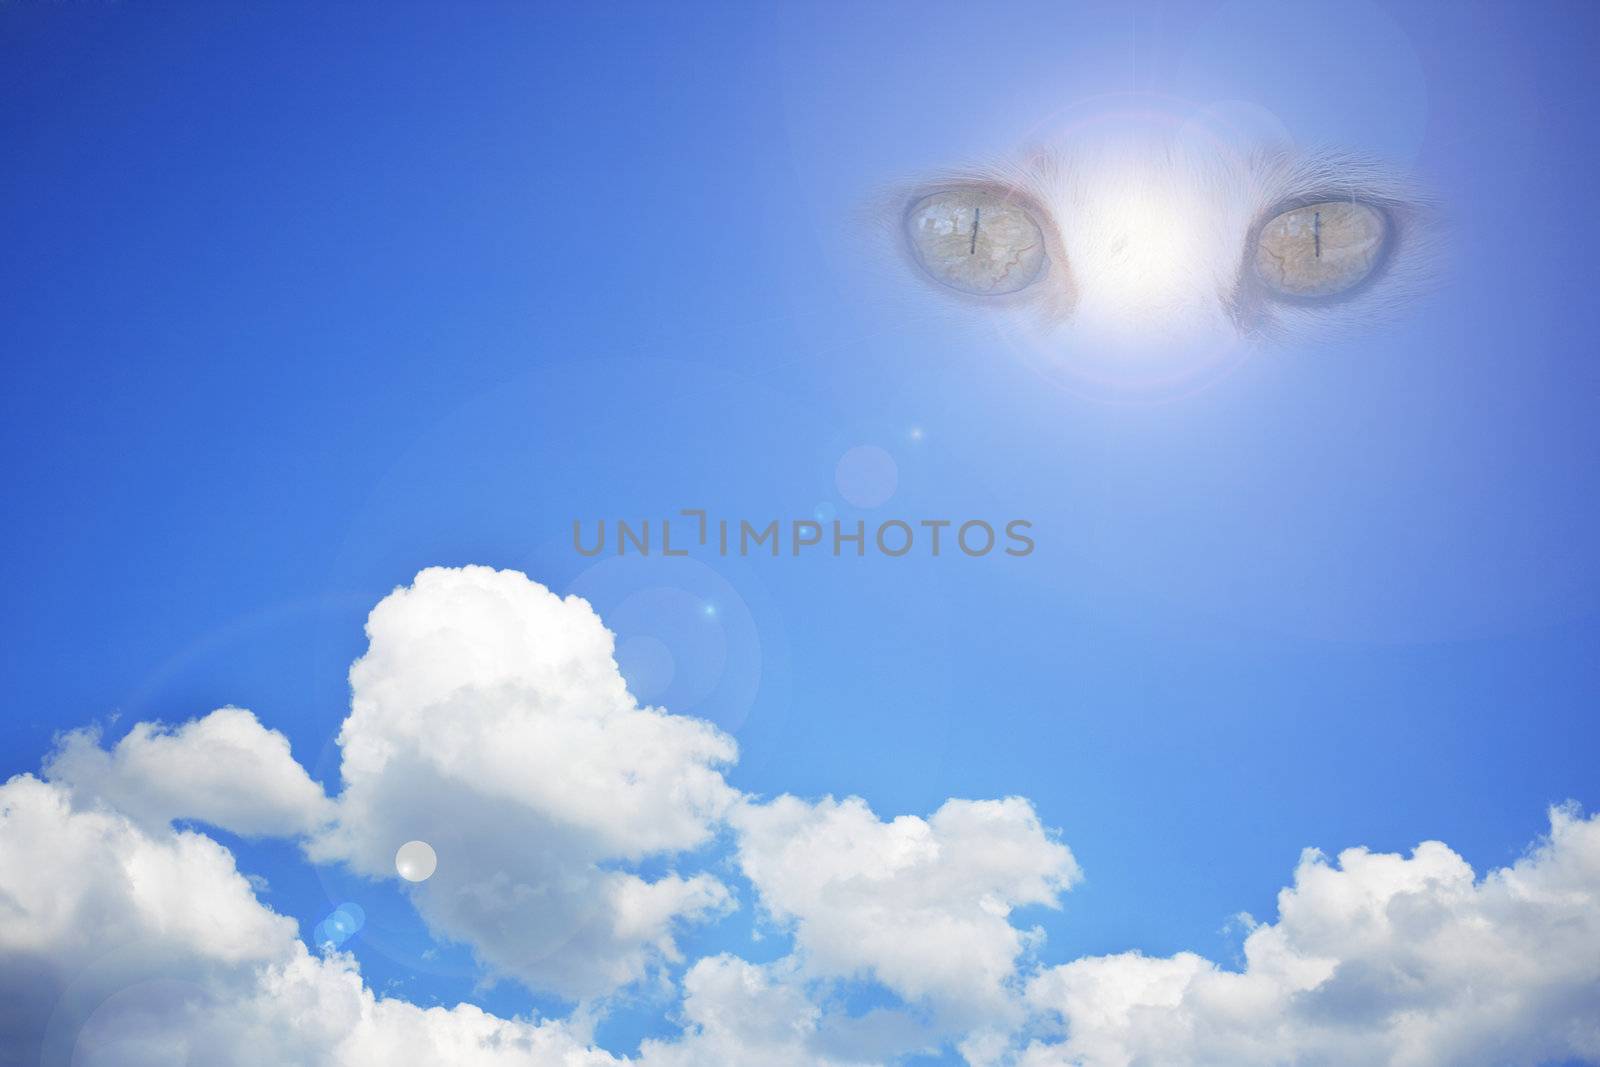 Animal eyes in the blue sky. An abstract background